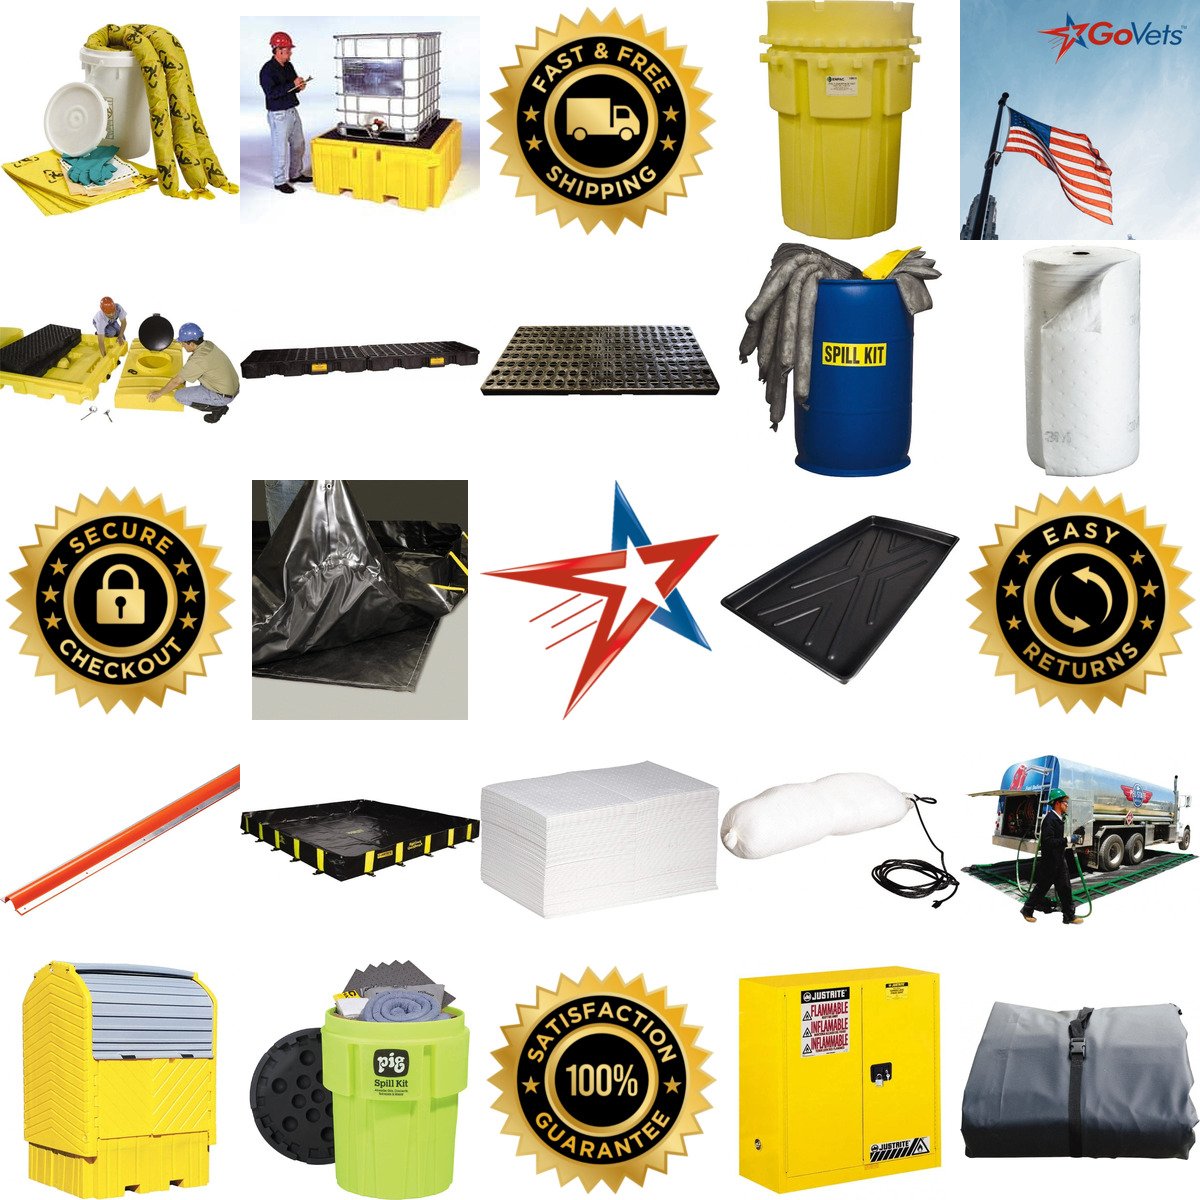 A selection of Spill Control and Containment products on GoVets